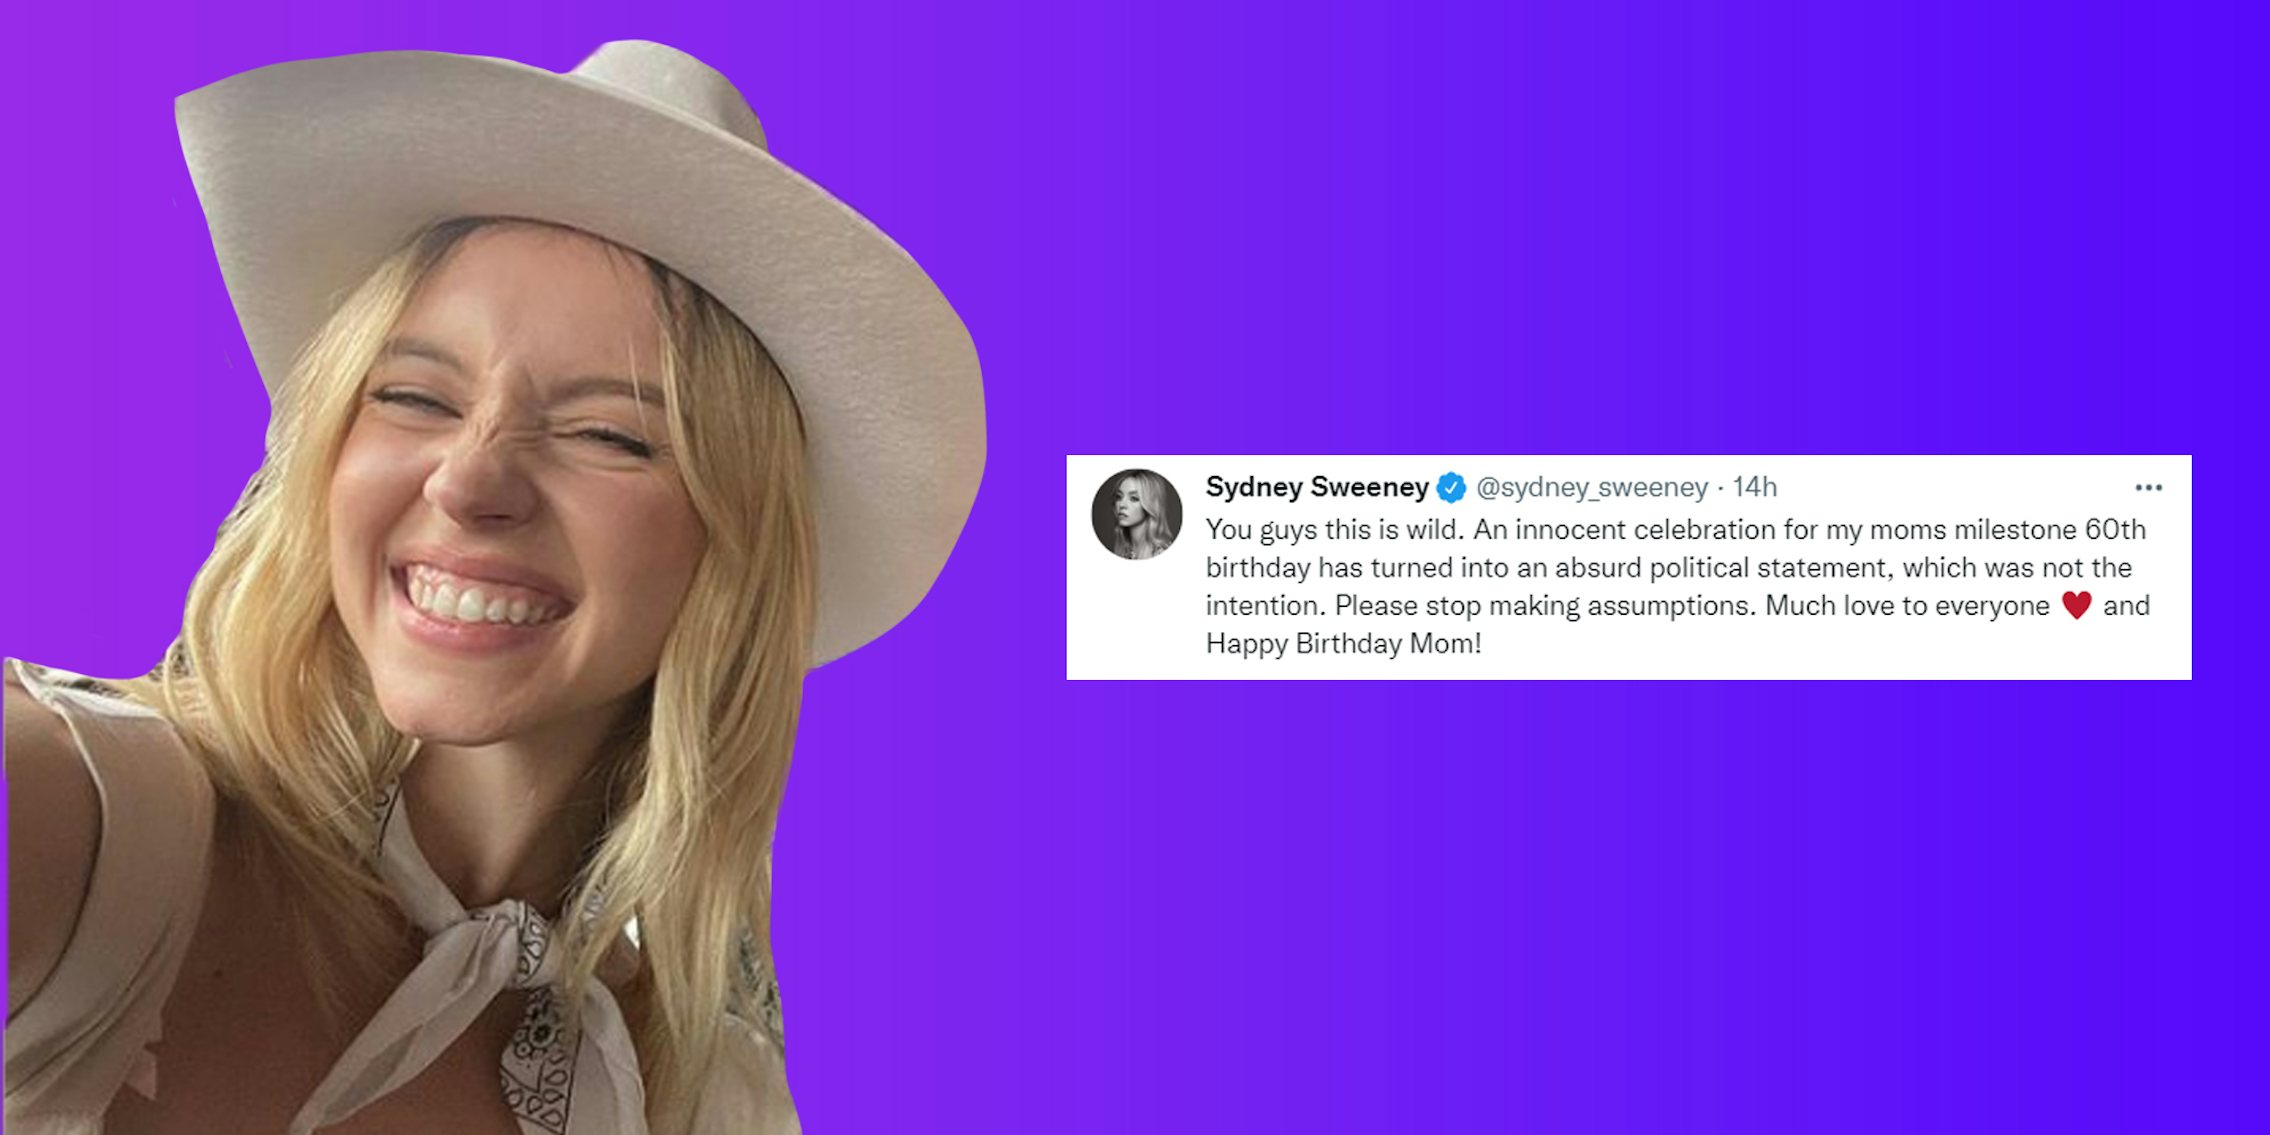 Sydney Sweeney in cowgirl hat on left with tweet on right caption 'You guys this is wild. An innocent celebration for my moms milestone 60th birthday has turned into an absurd political statement, which was not the intention. Please stop making assumptions. Much love to everyone and Happy Birthday Mom!' on purple blue gradient background